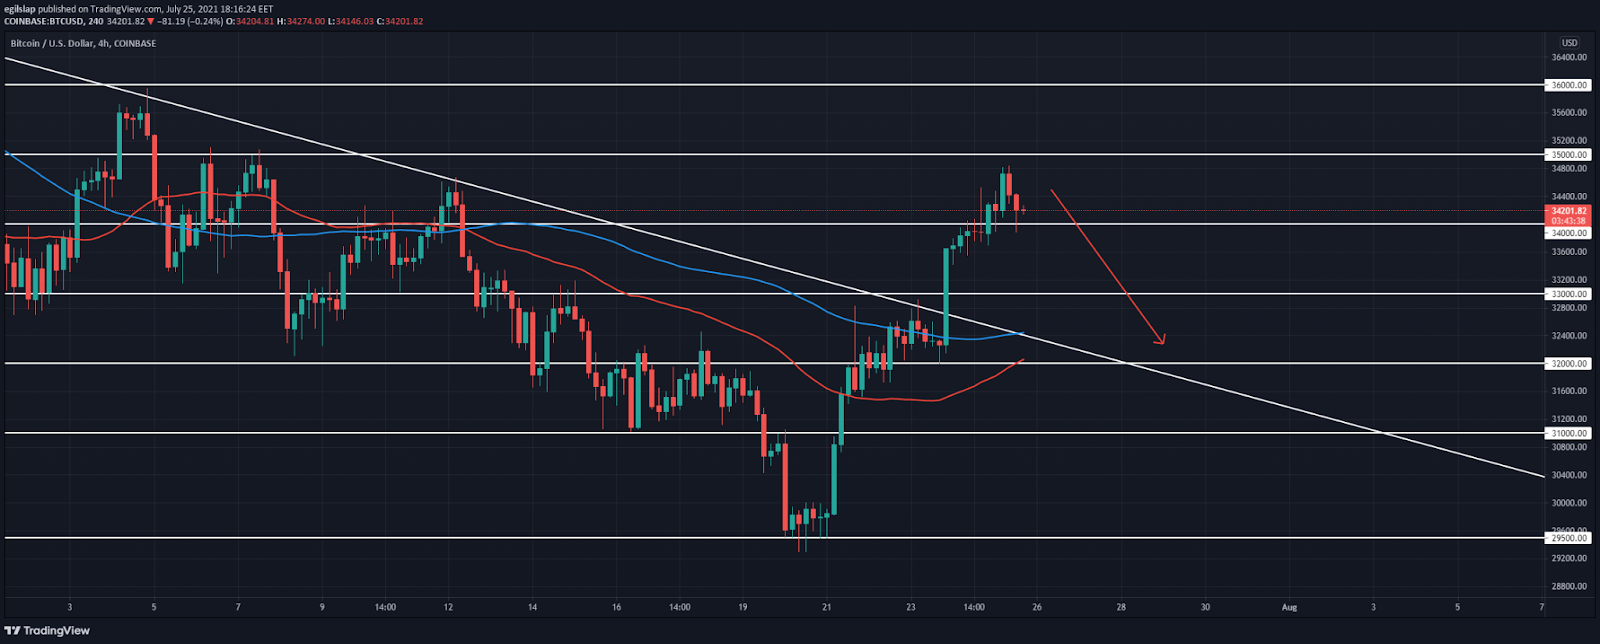 Bitcoin Price Analysis: BTC finds resistance below $35,000, ready to retrace?